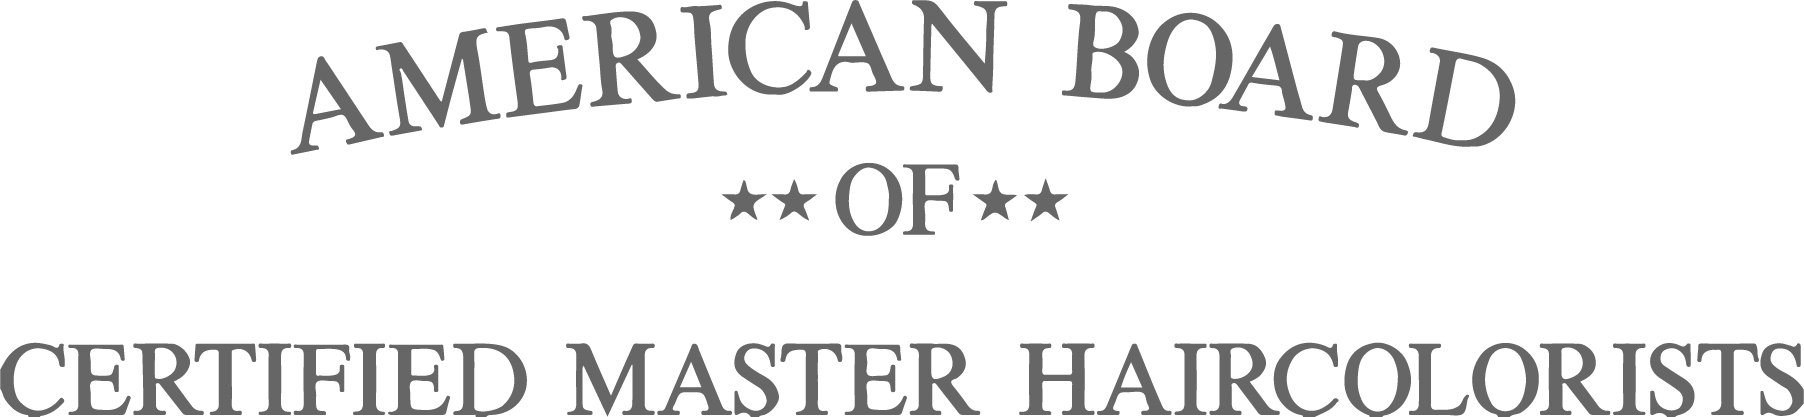 American Board of Certified Master Haircolorists